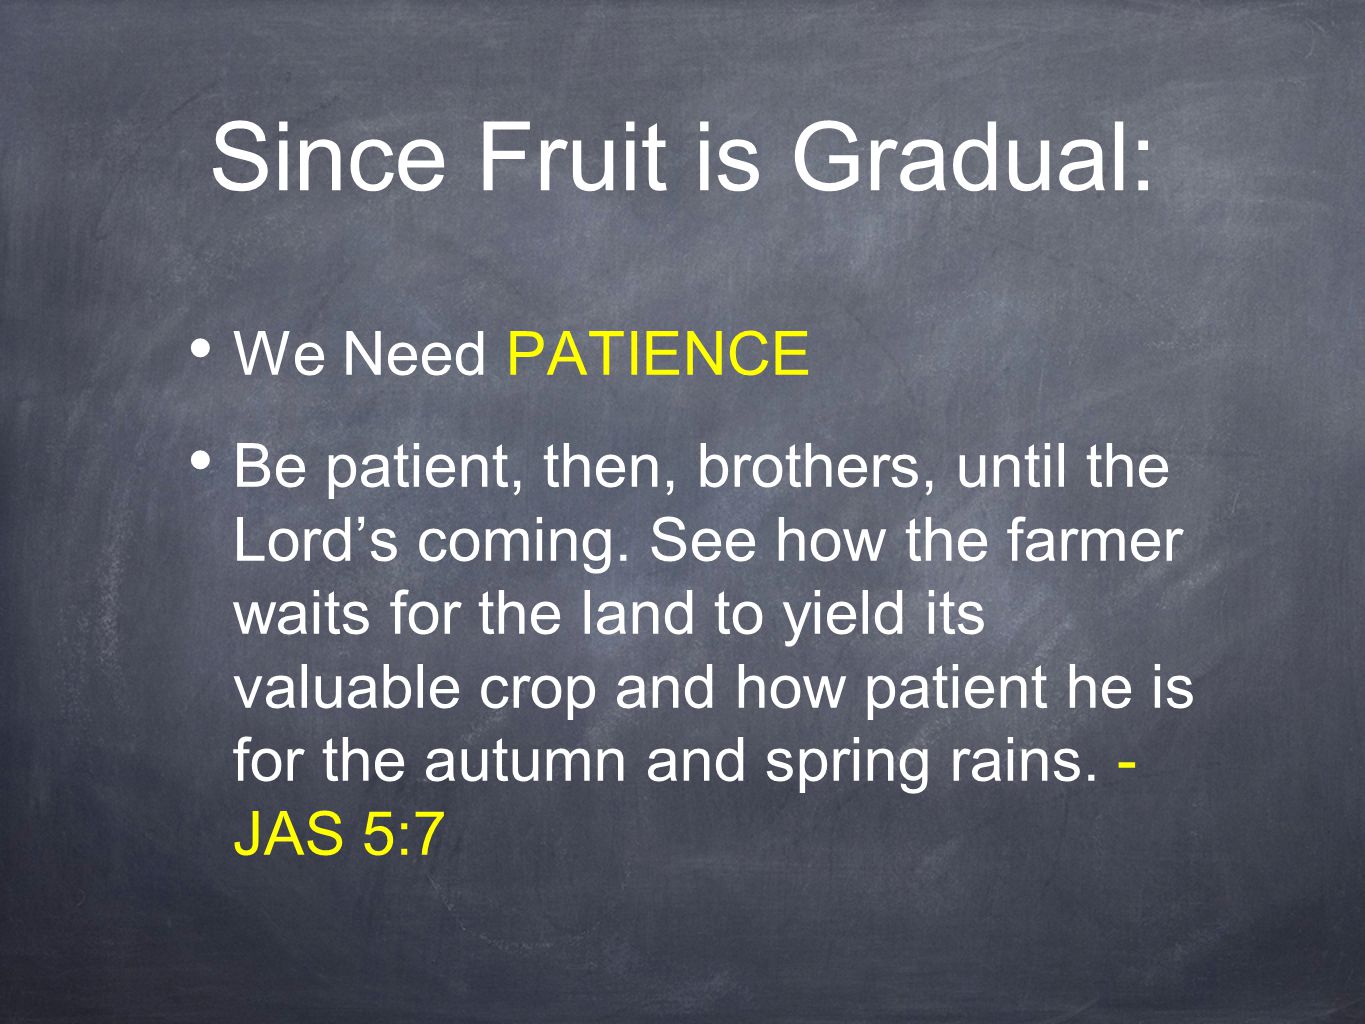 Since Fruit is Gradual: We Need PATIENCE Be patient, then, brothers, until the Lord’s coming.